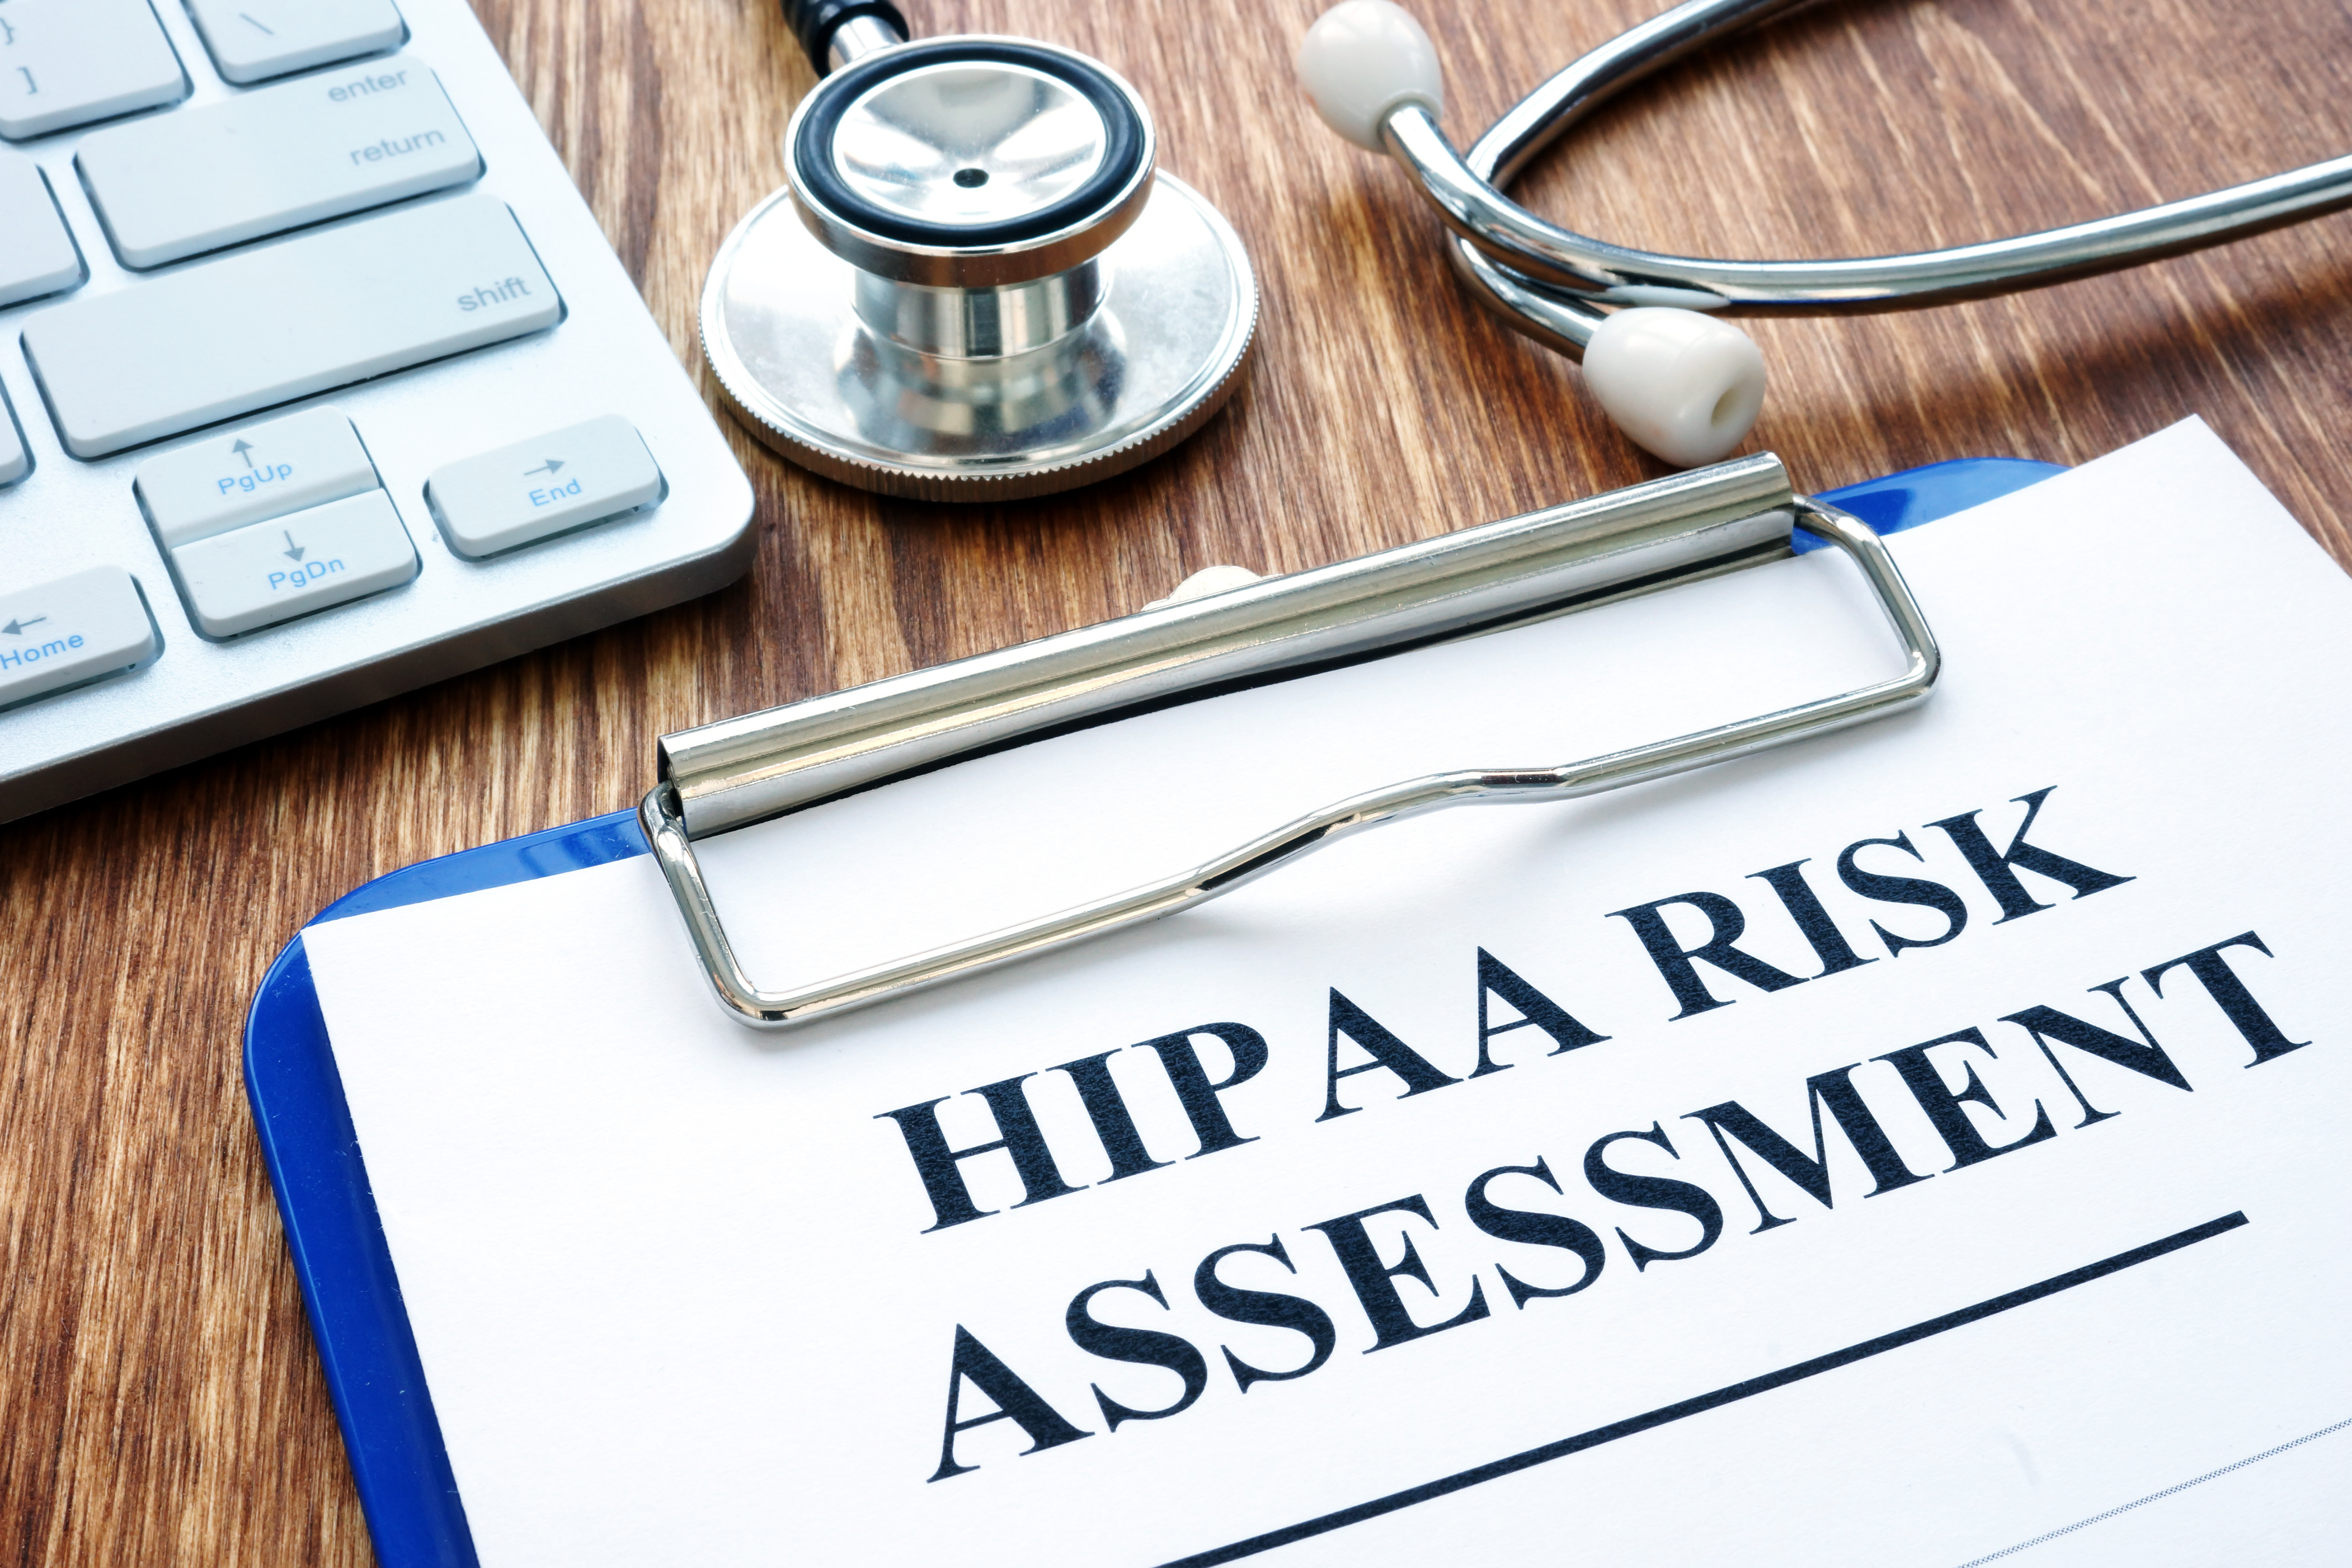 Why It’s Not Recommended to Perform Your Own HIPAA Assessment